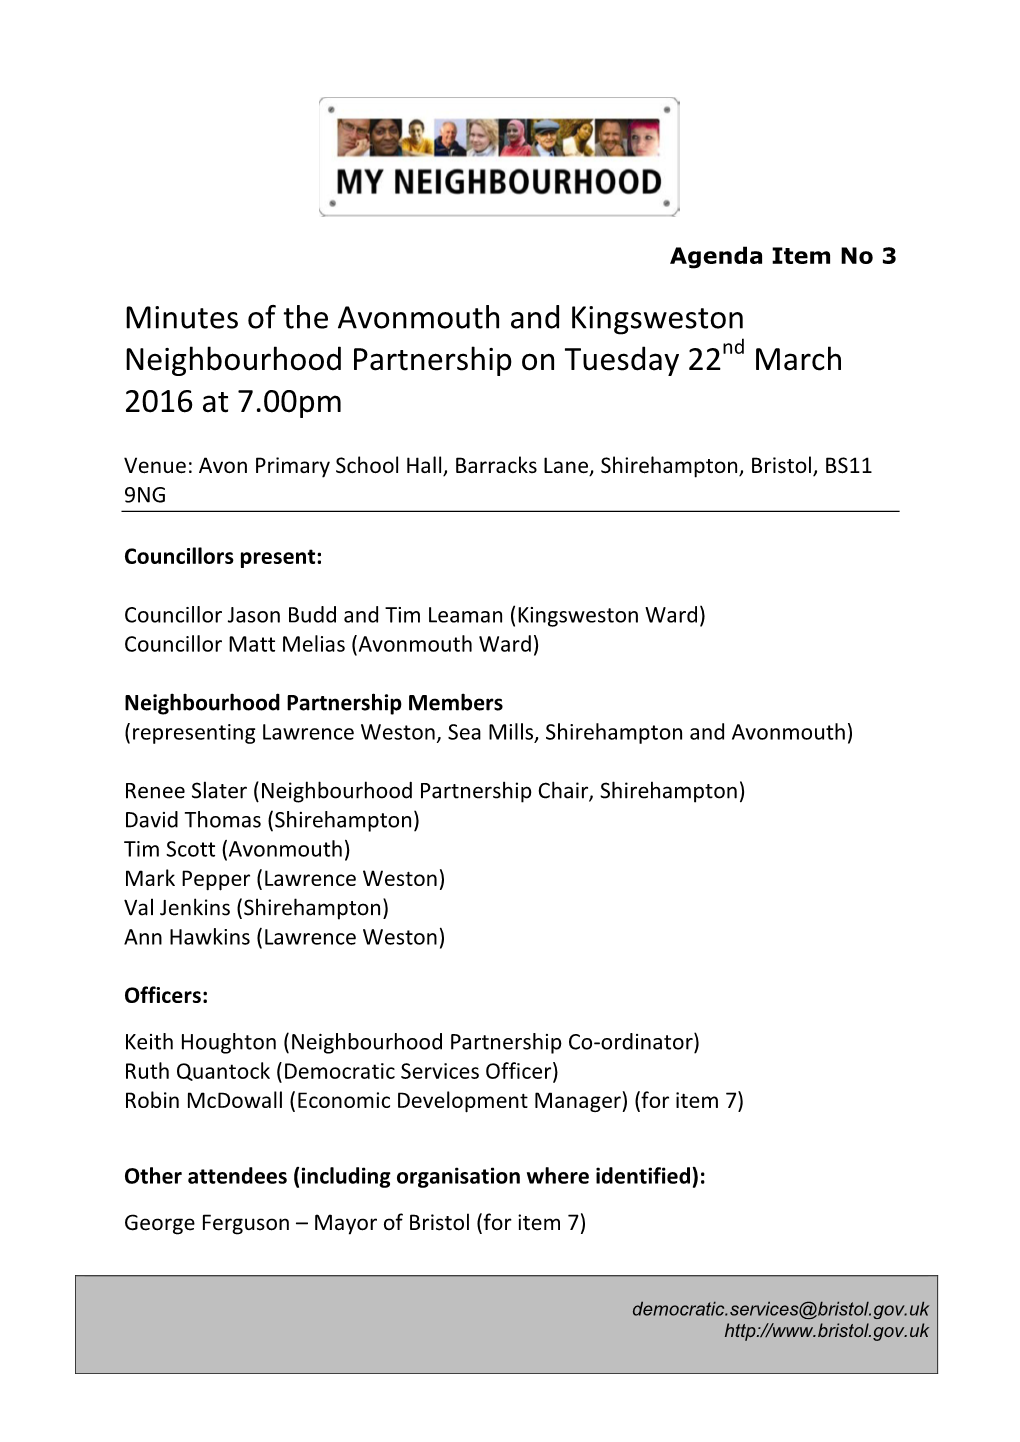 Minutes of the Avonmouth and Kingsweston Neighbourhood Partnership on Tuesday 22Nd March 2016 at 7.00Pm